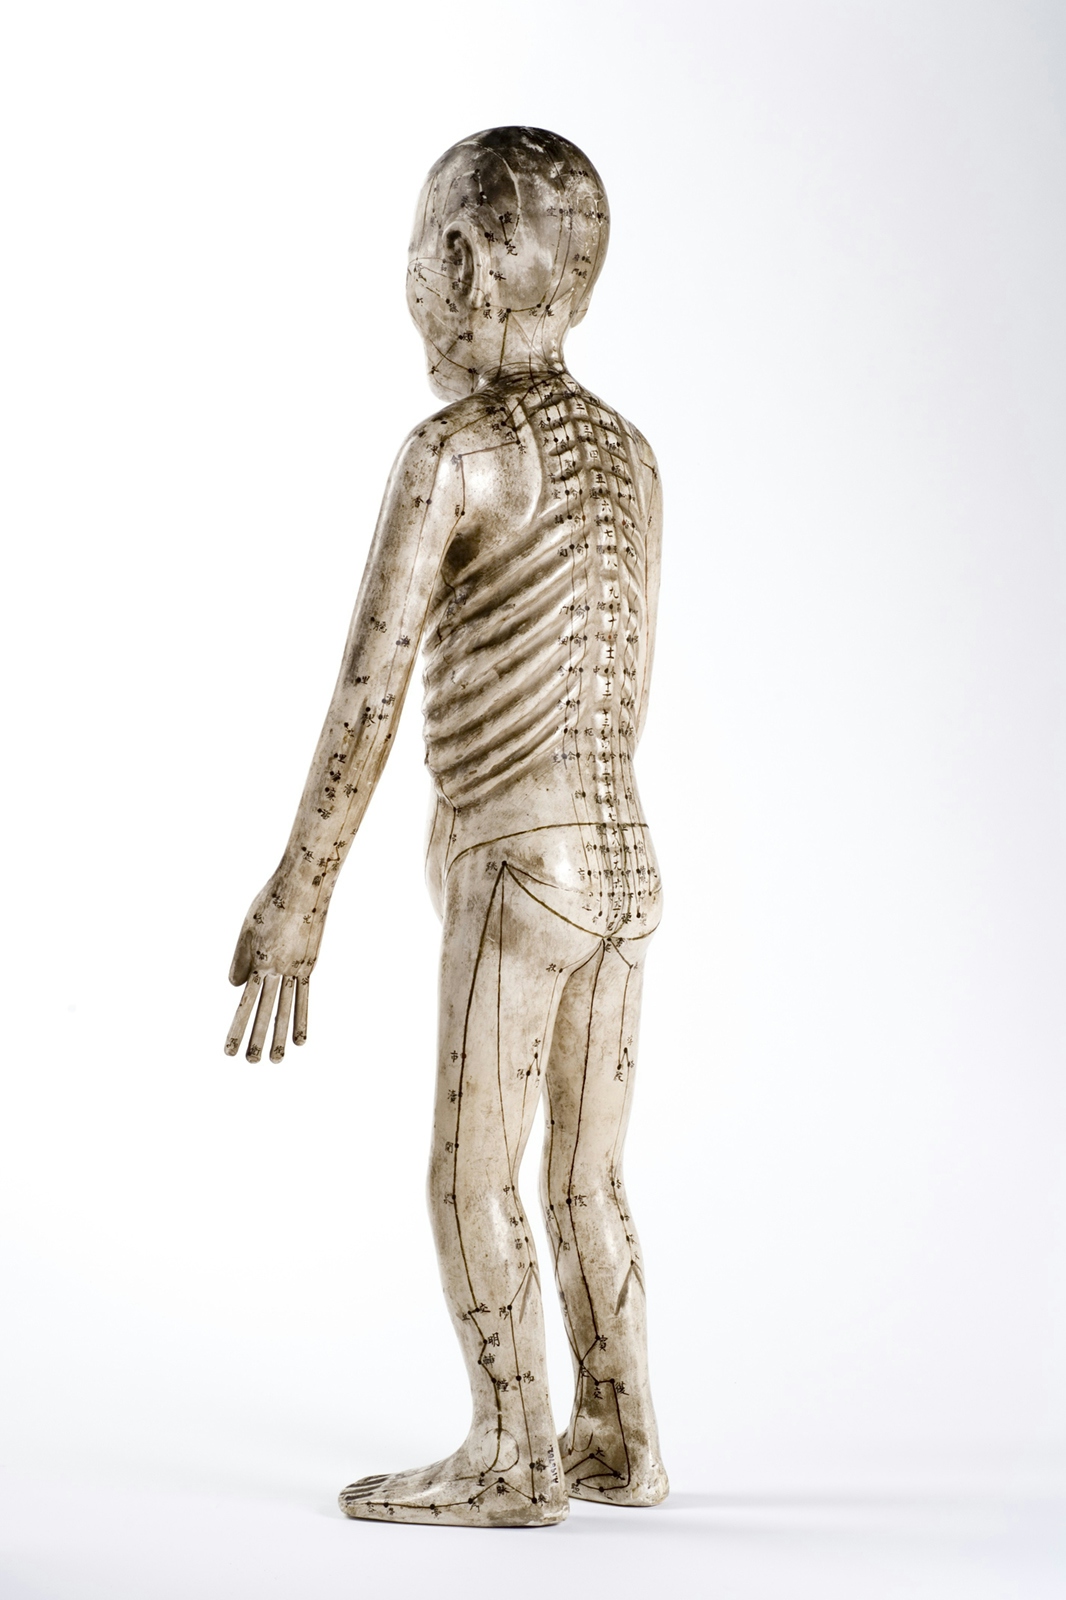 An image of a human figure made from papier mache with acupuncture points marked on it.